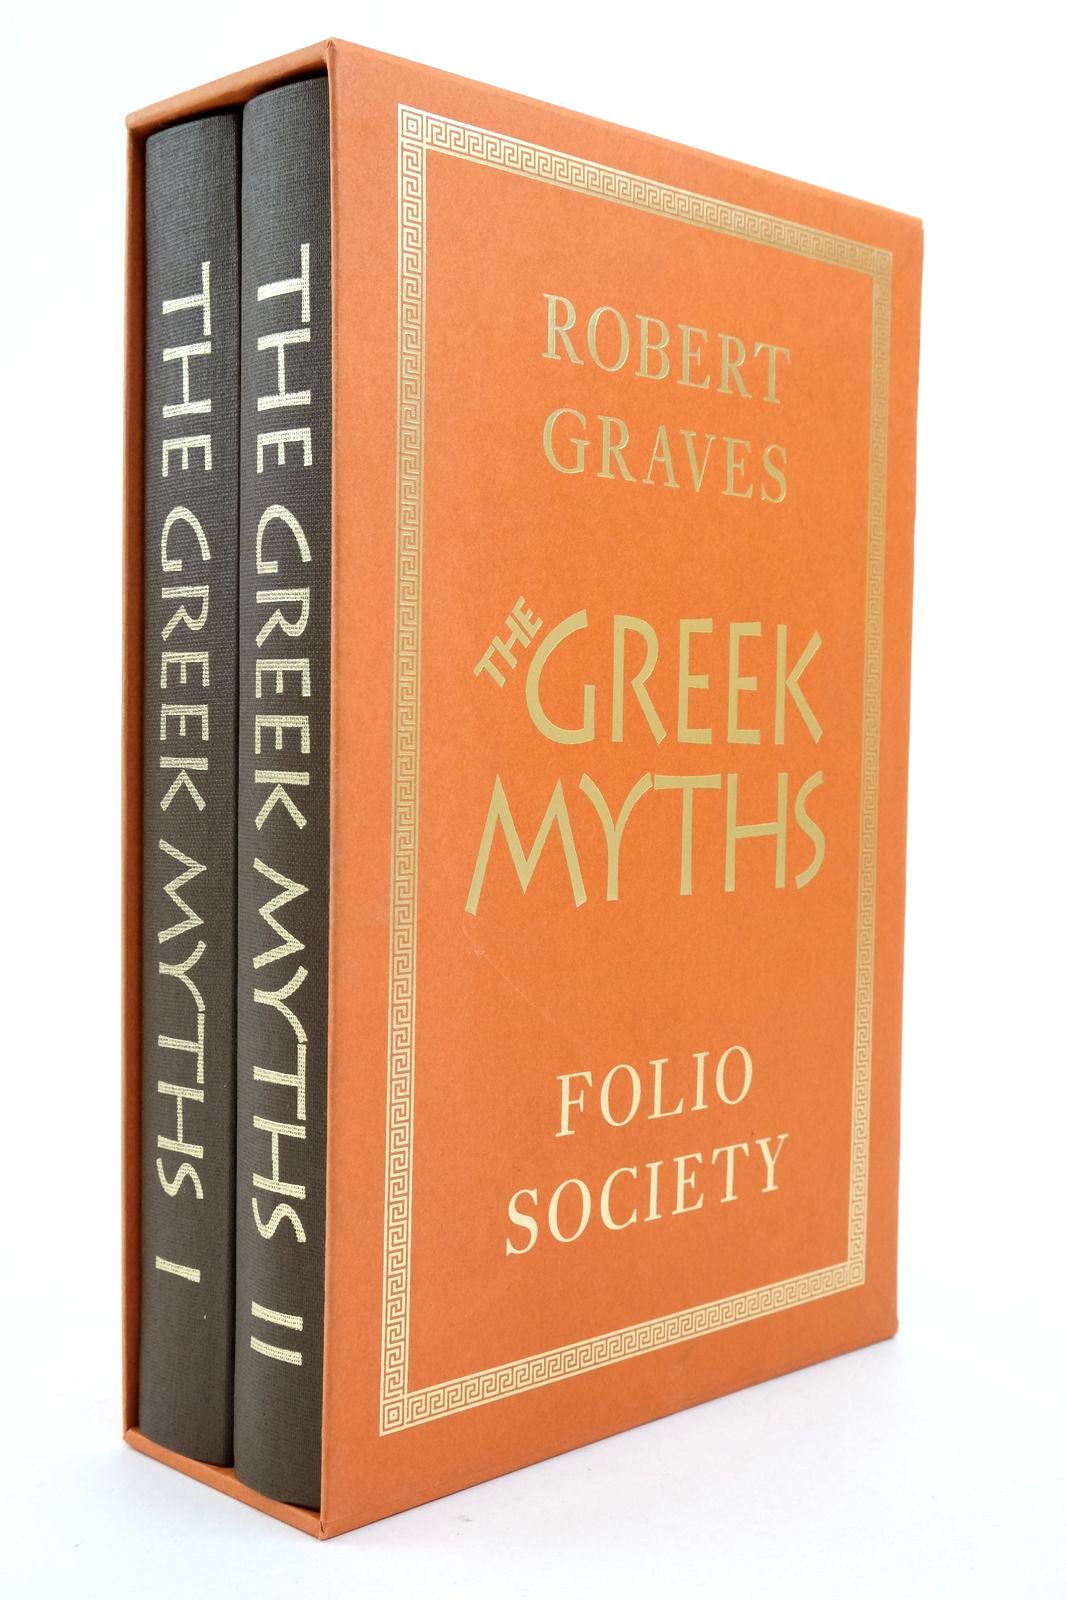 Photo of THE GREEK MYTHS (2 VOLUMES) written by Graves, Robert McLeish, Kenneth illustrated by Baker, Grahame published by Folio Society (STOCK CODE: 2137857)  for sale by Stella & Rose's Books